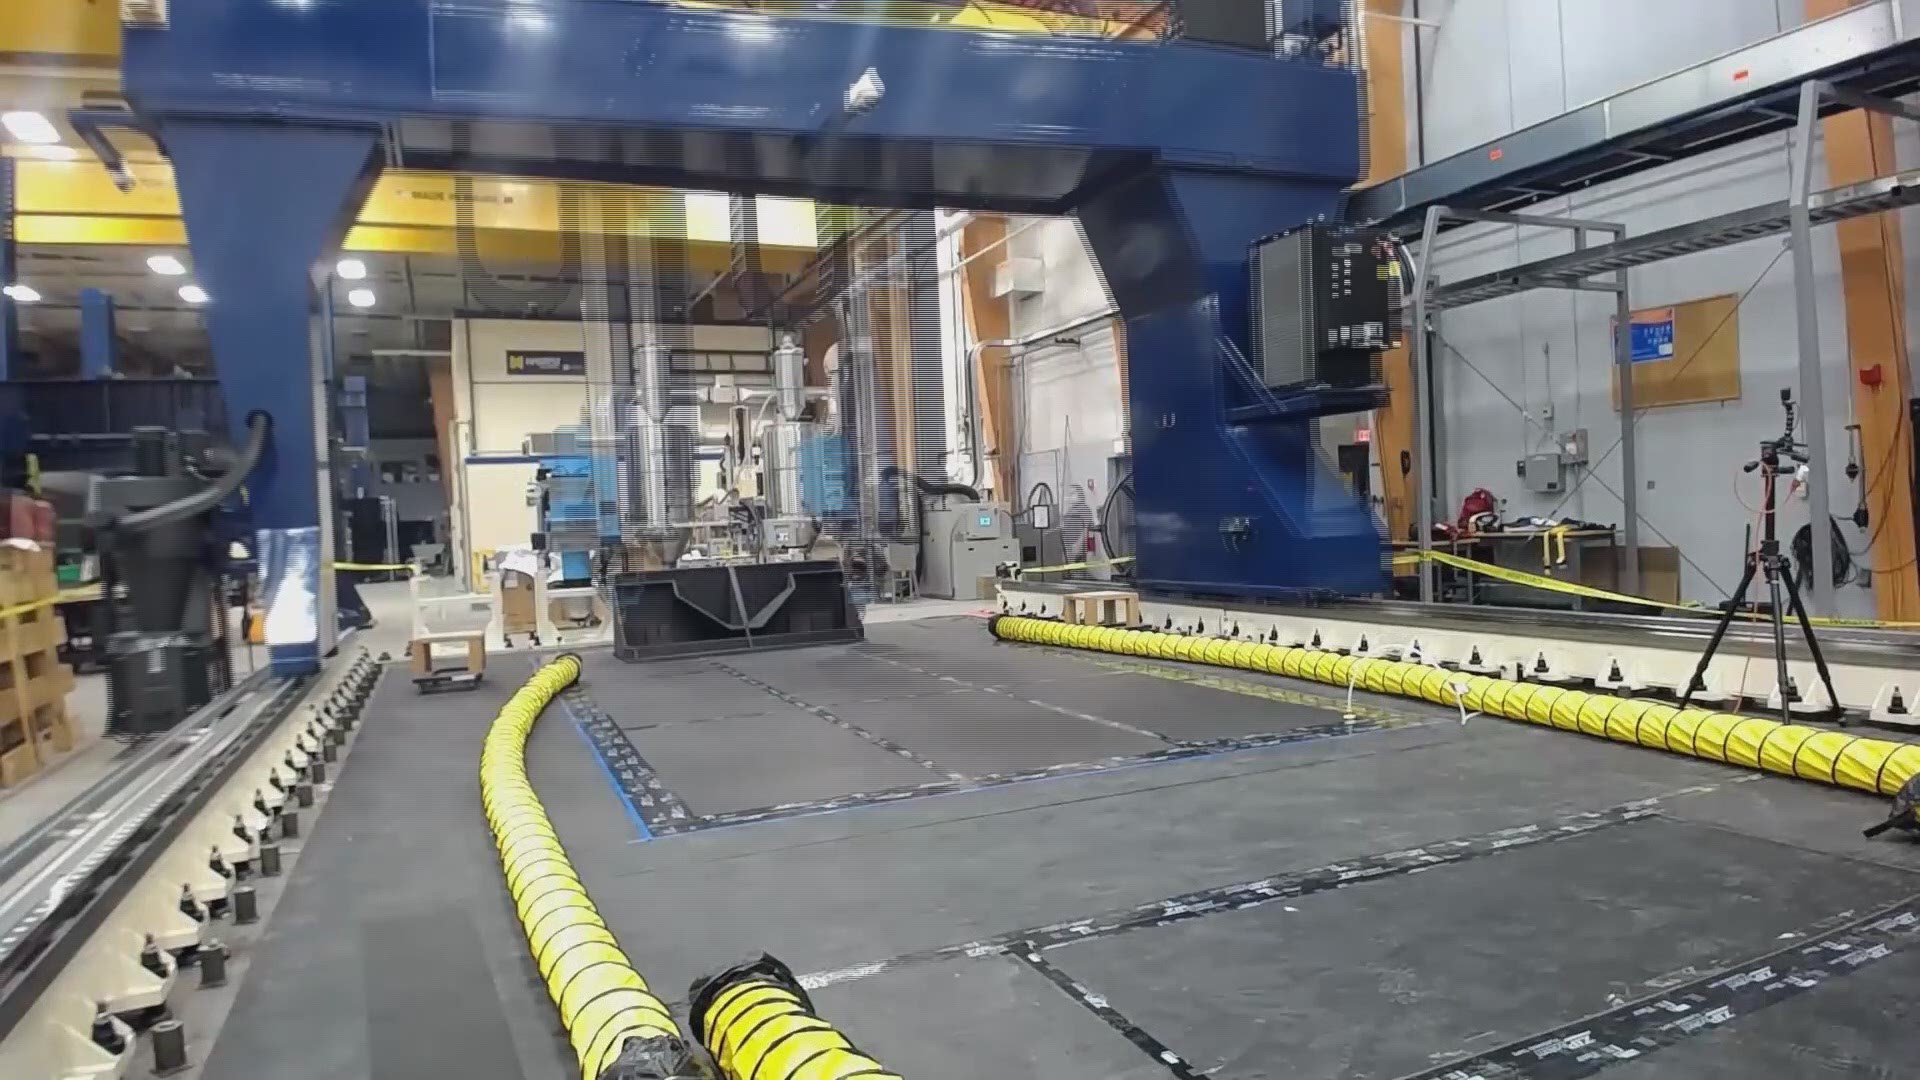 Captivating time-lapse video of the University of Maine's record-breaking 3D printer producing a 25 foot, 5,000-pound patrol boat in just 72 hours.